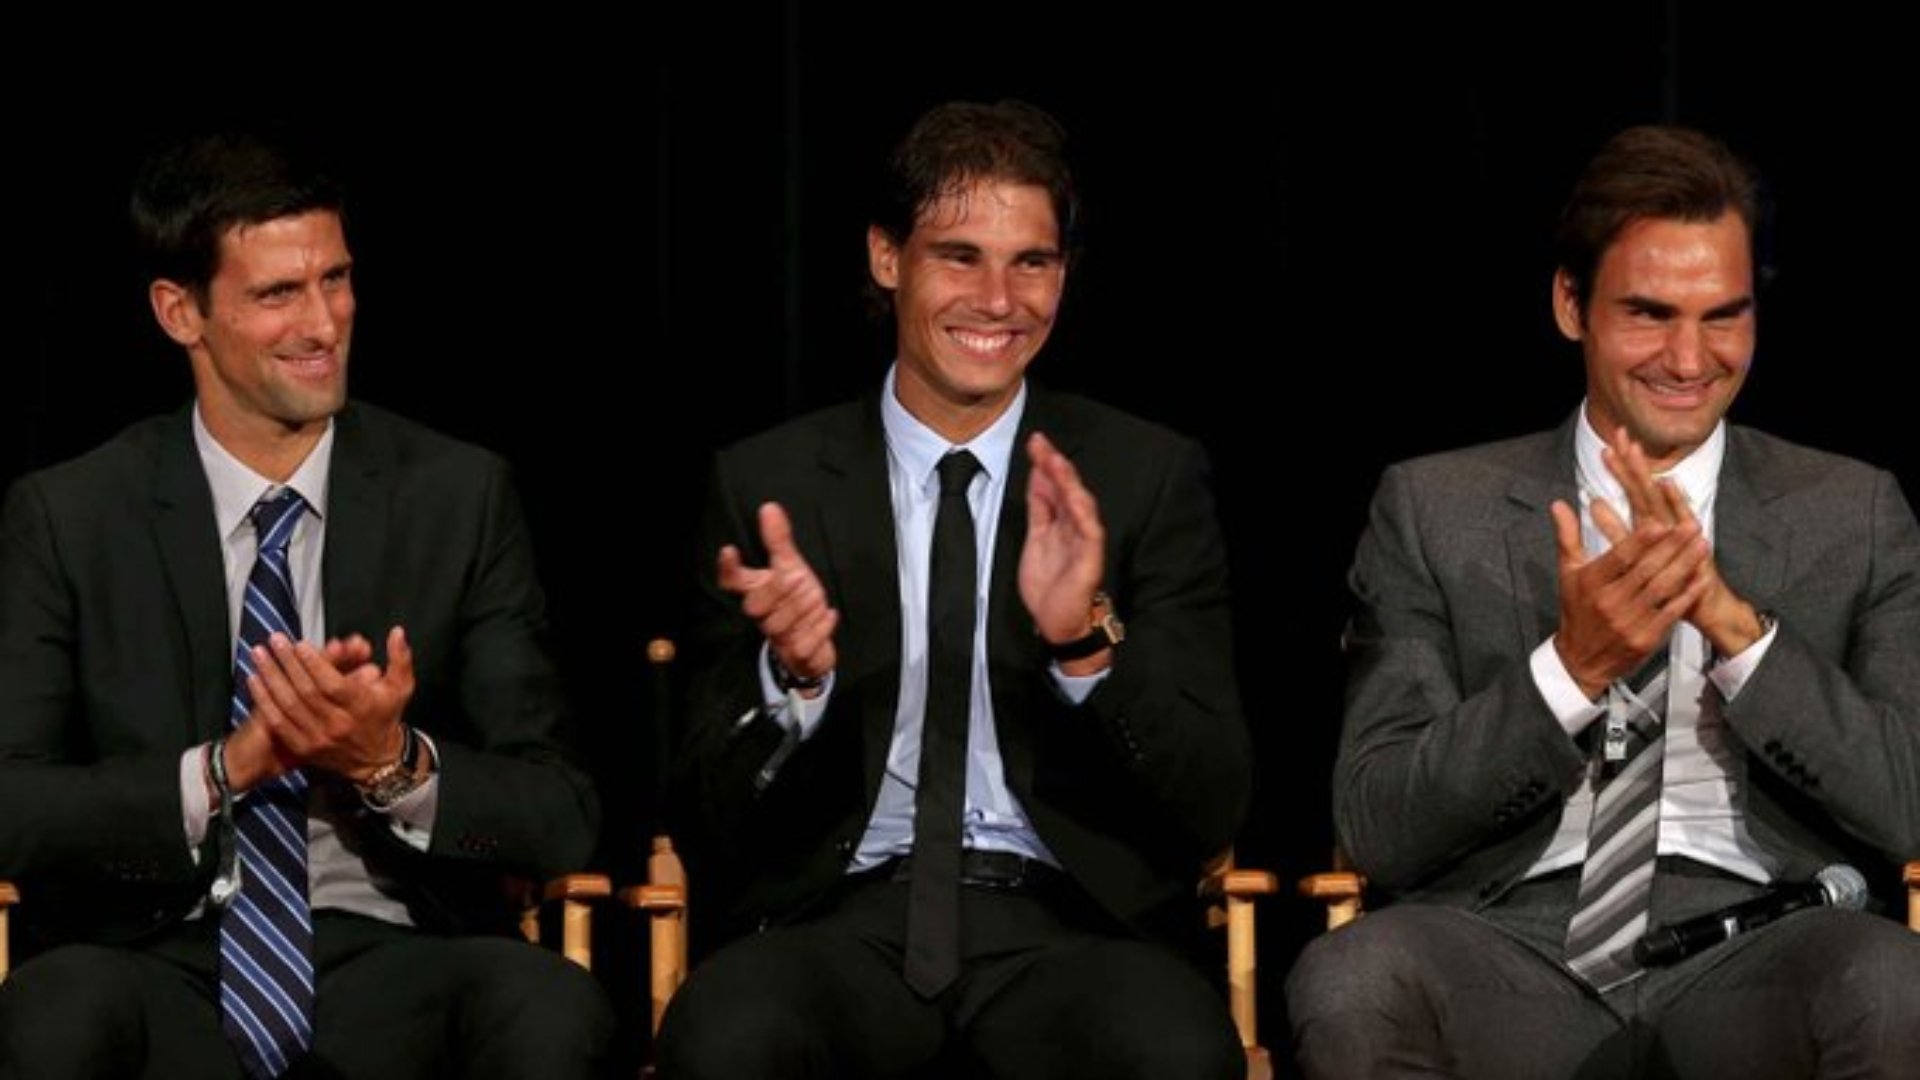 The rivalry of Rafael Nadal, Novak Djokovic and Roger Federer has taken Tennis to a whole new level.